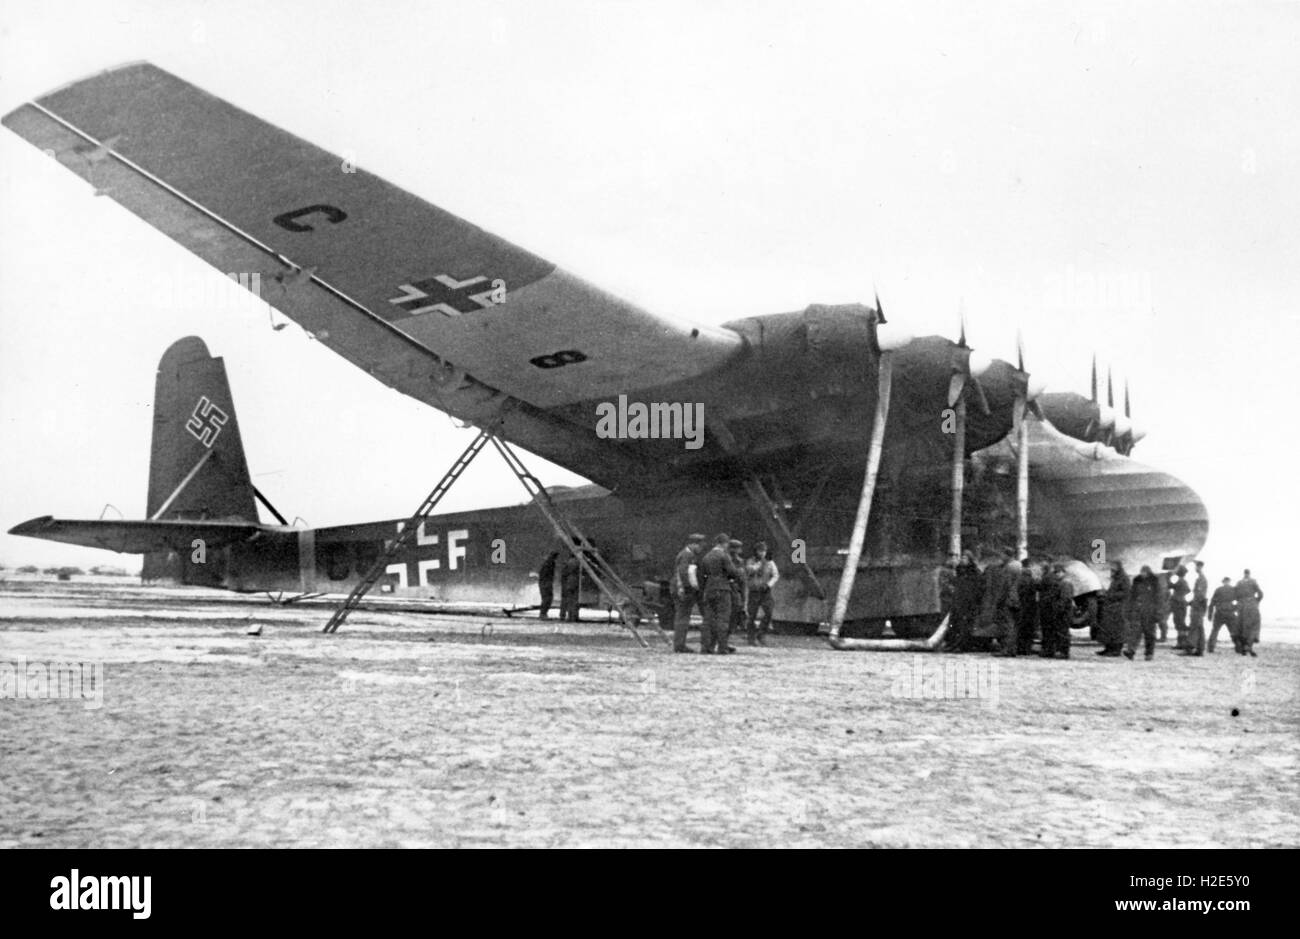 The Nazi propaganda image depicts the transport aircraft Messerschmitt Me 323 'Giant' C8+FN of the German Wehrmacht on the Eastern Front. The photo was published in November 1943. Fotoarchiv für Zeitgeschichte - NO WIRE SERVICE -  | usage worldwide Stock Photo